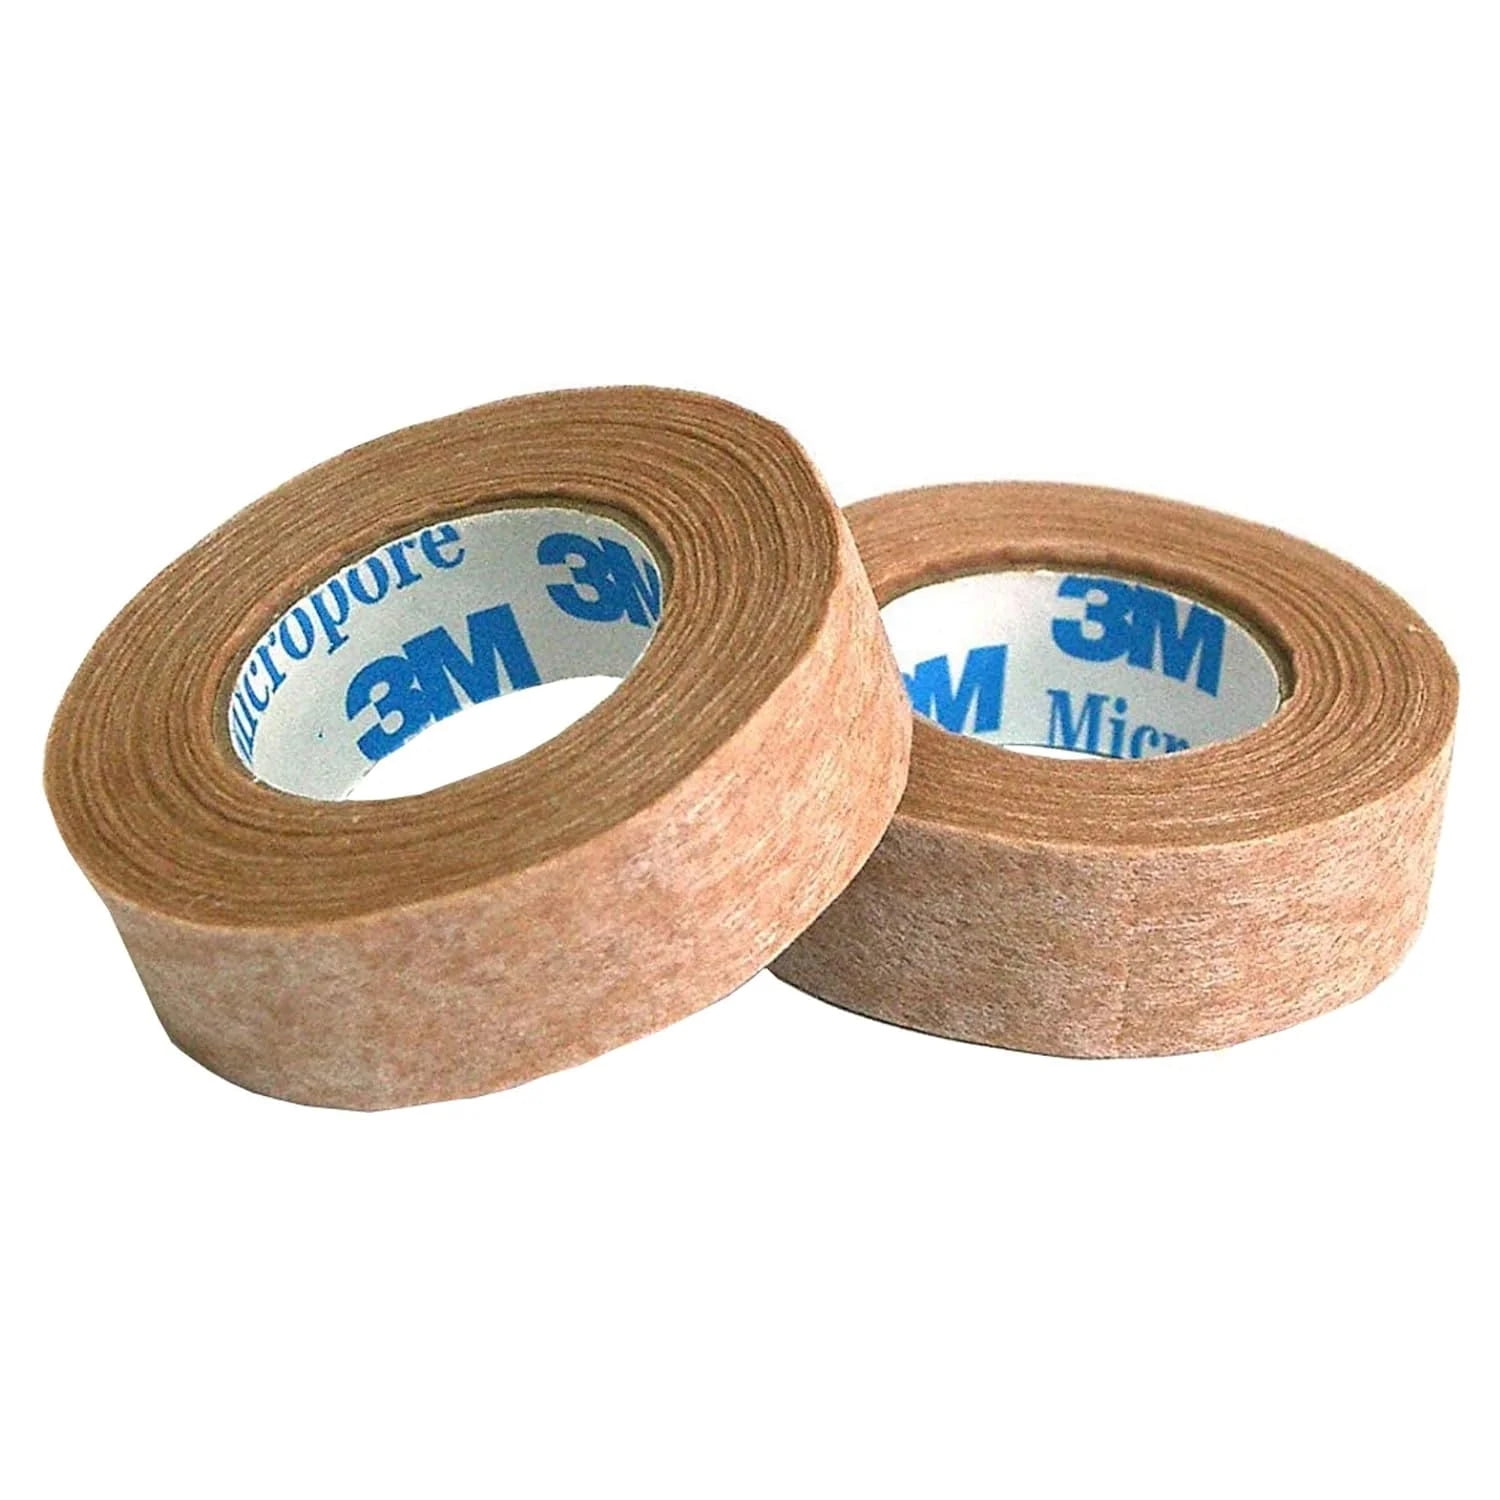 3M Micropore Skin Friendly Paper Medical Tape NonSterile 1/2 inch x 10 Yards, 6 Pack